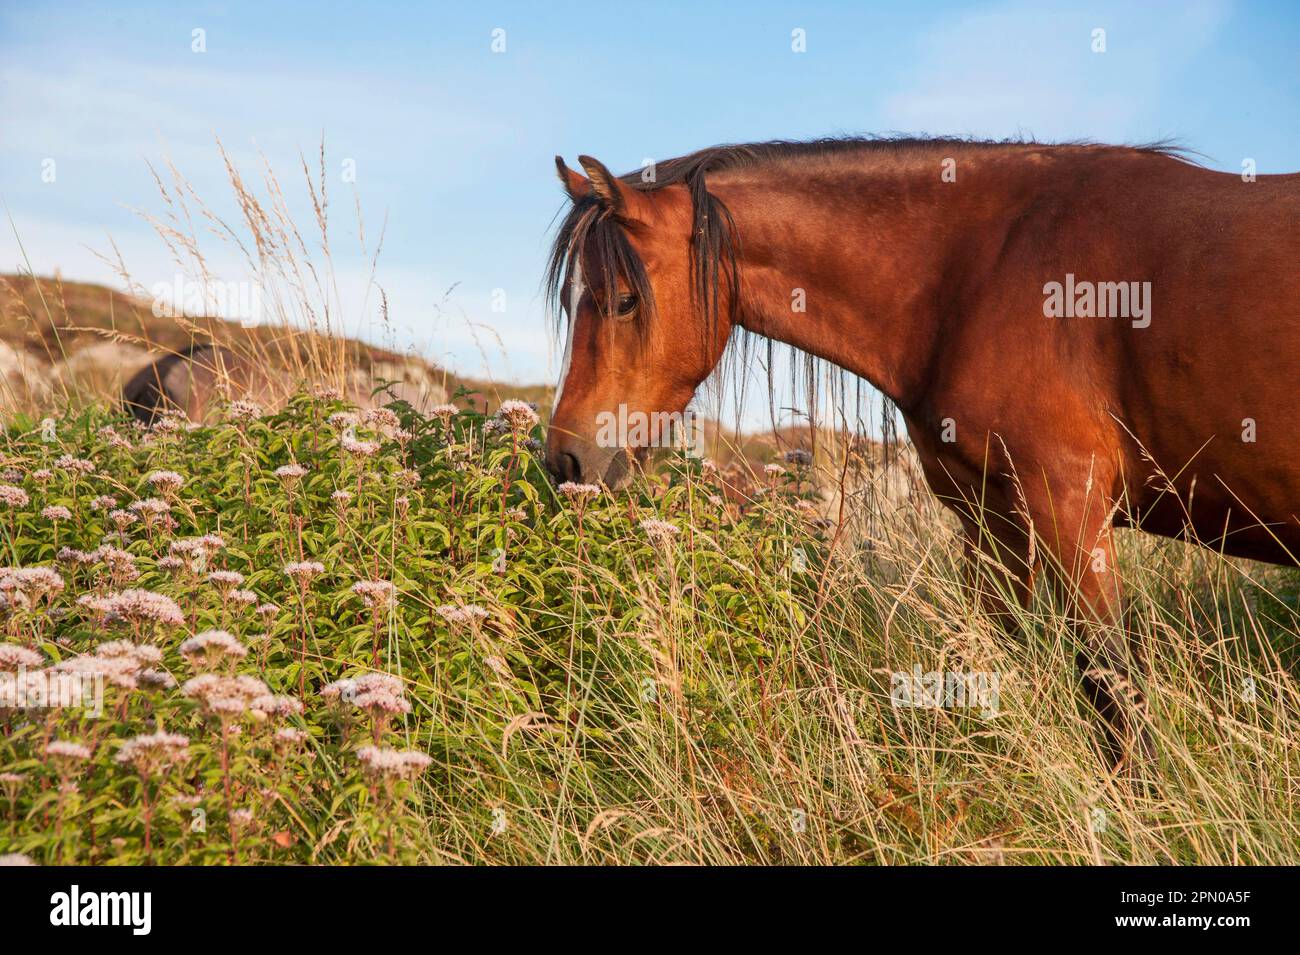 Horse, Welsh pony, adult, feeding, used for conservation grazing to control unwanted vegetation after rabbit numbers were drastically reduced by Stock Photo